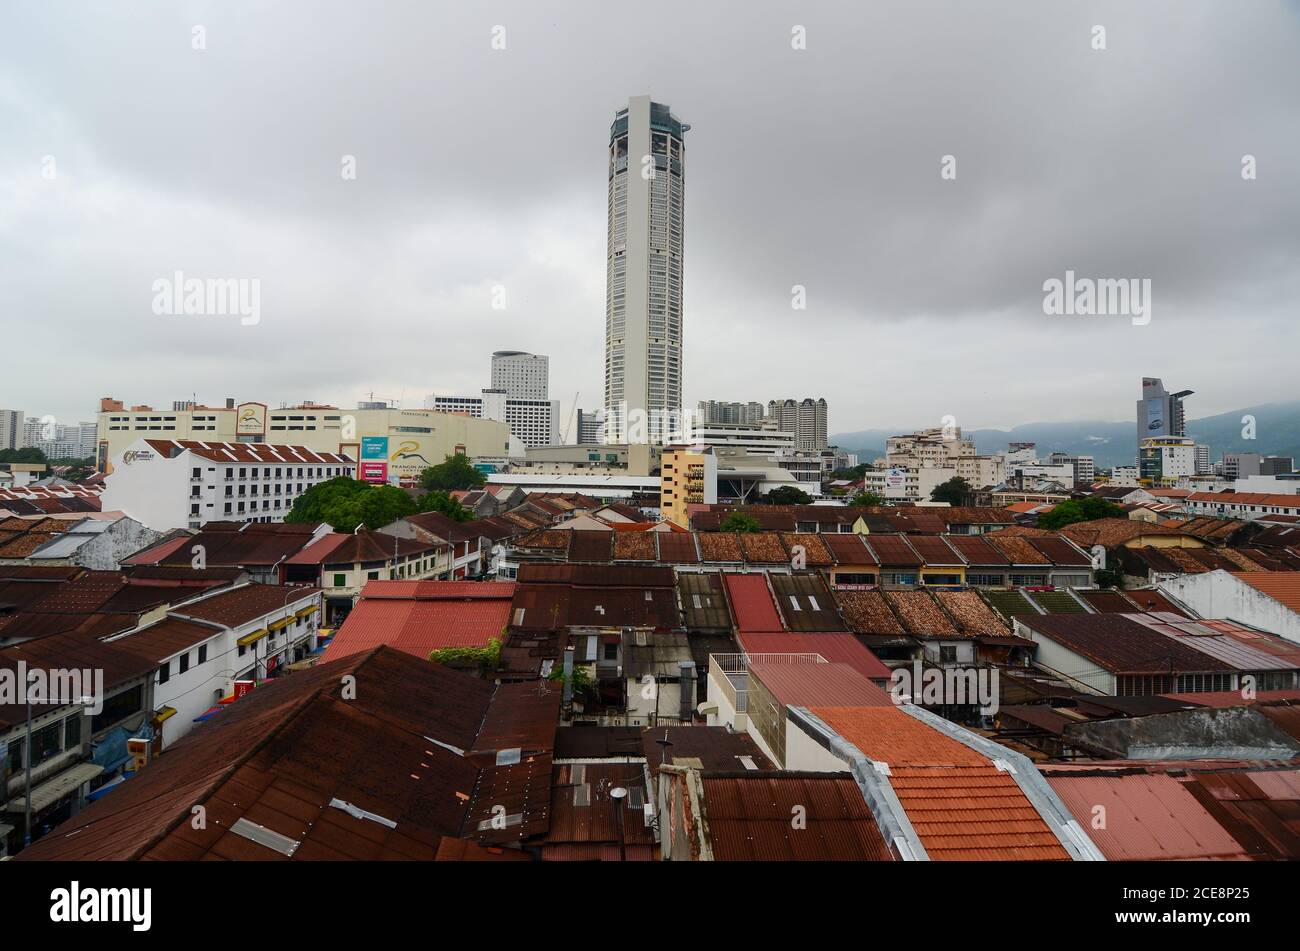 Georgetown, Penang/Malaysia - Jun 17 2016: Aerial view KOMTAR building with old heritage house. Stock Photo